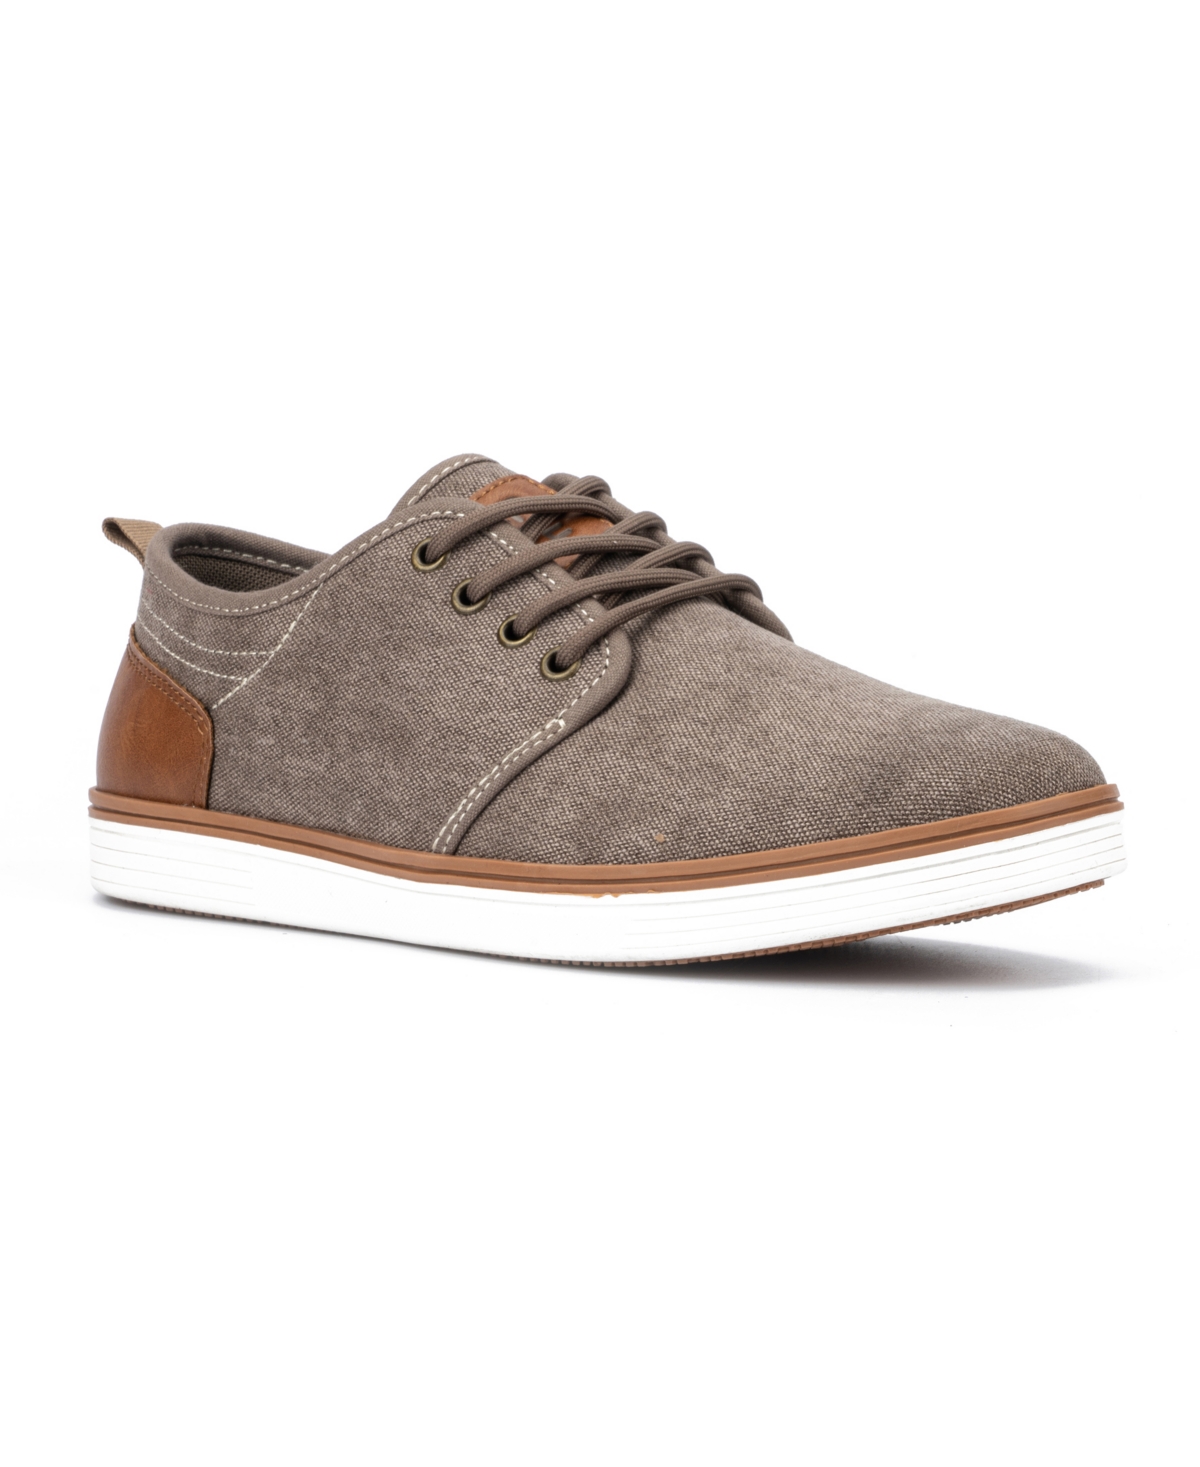 Men's New York Atomix Casual Sneakers - Taupe